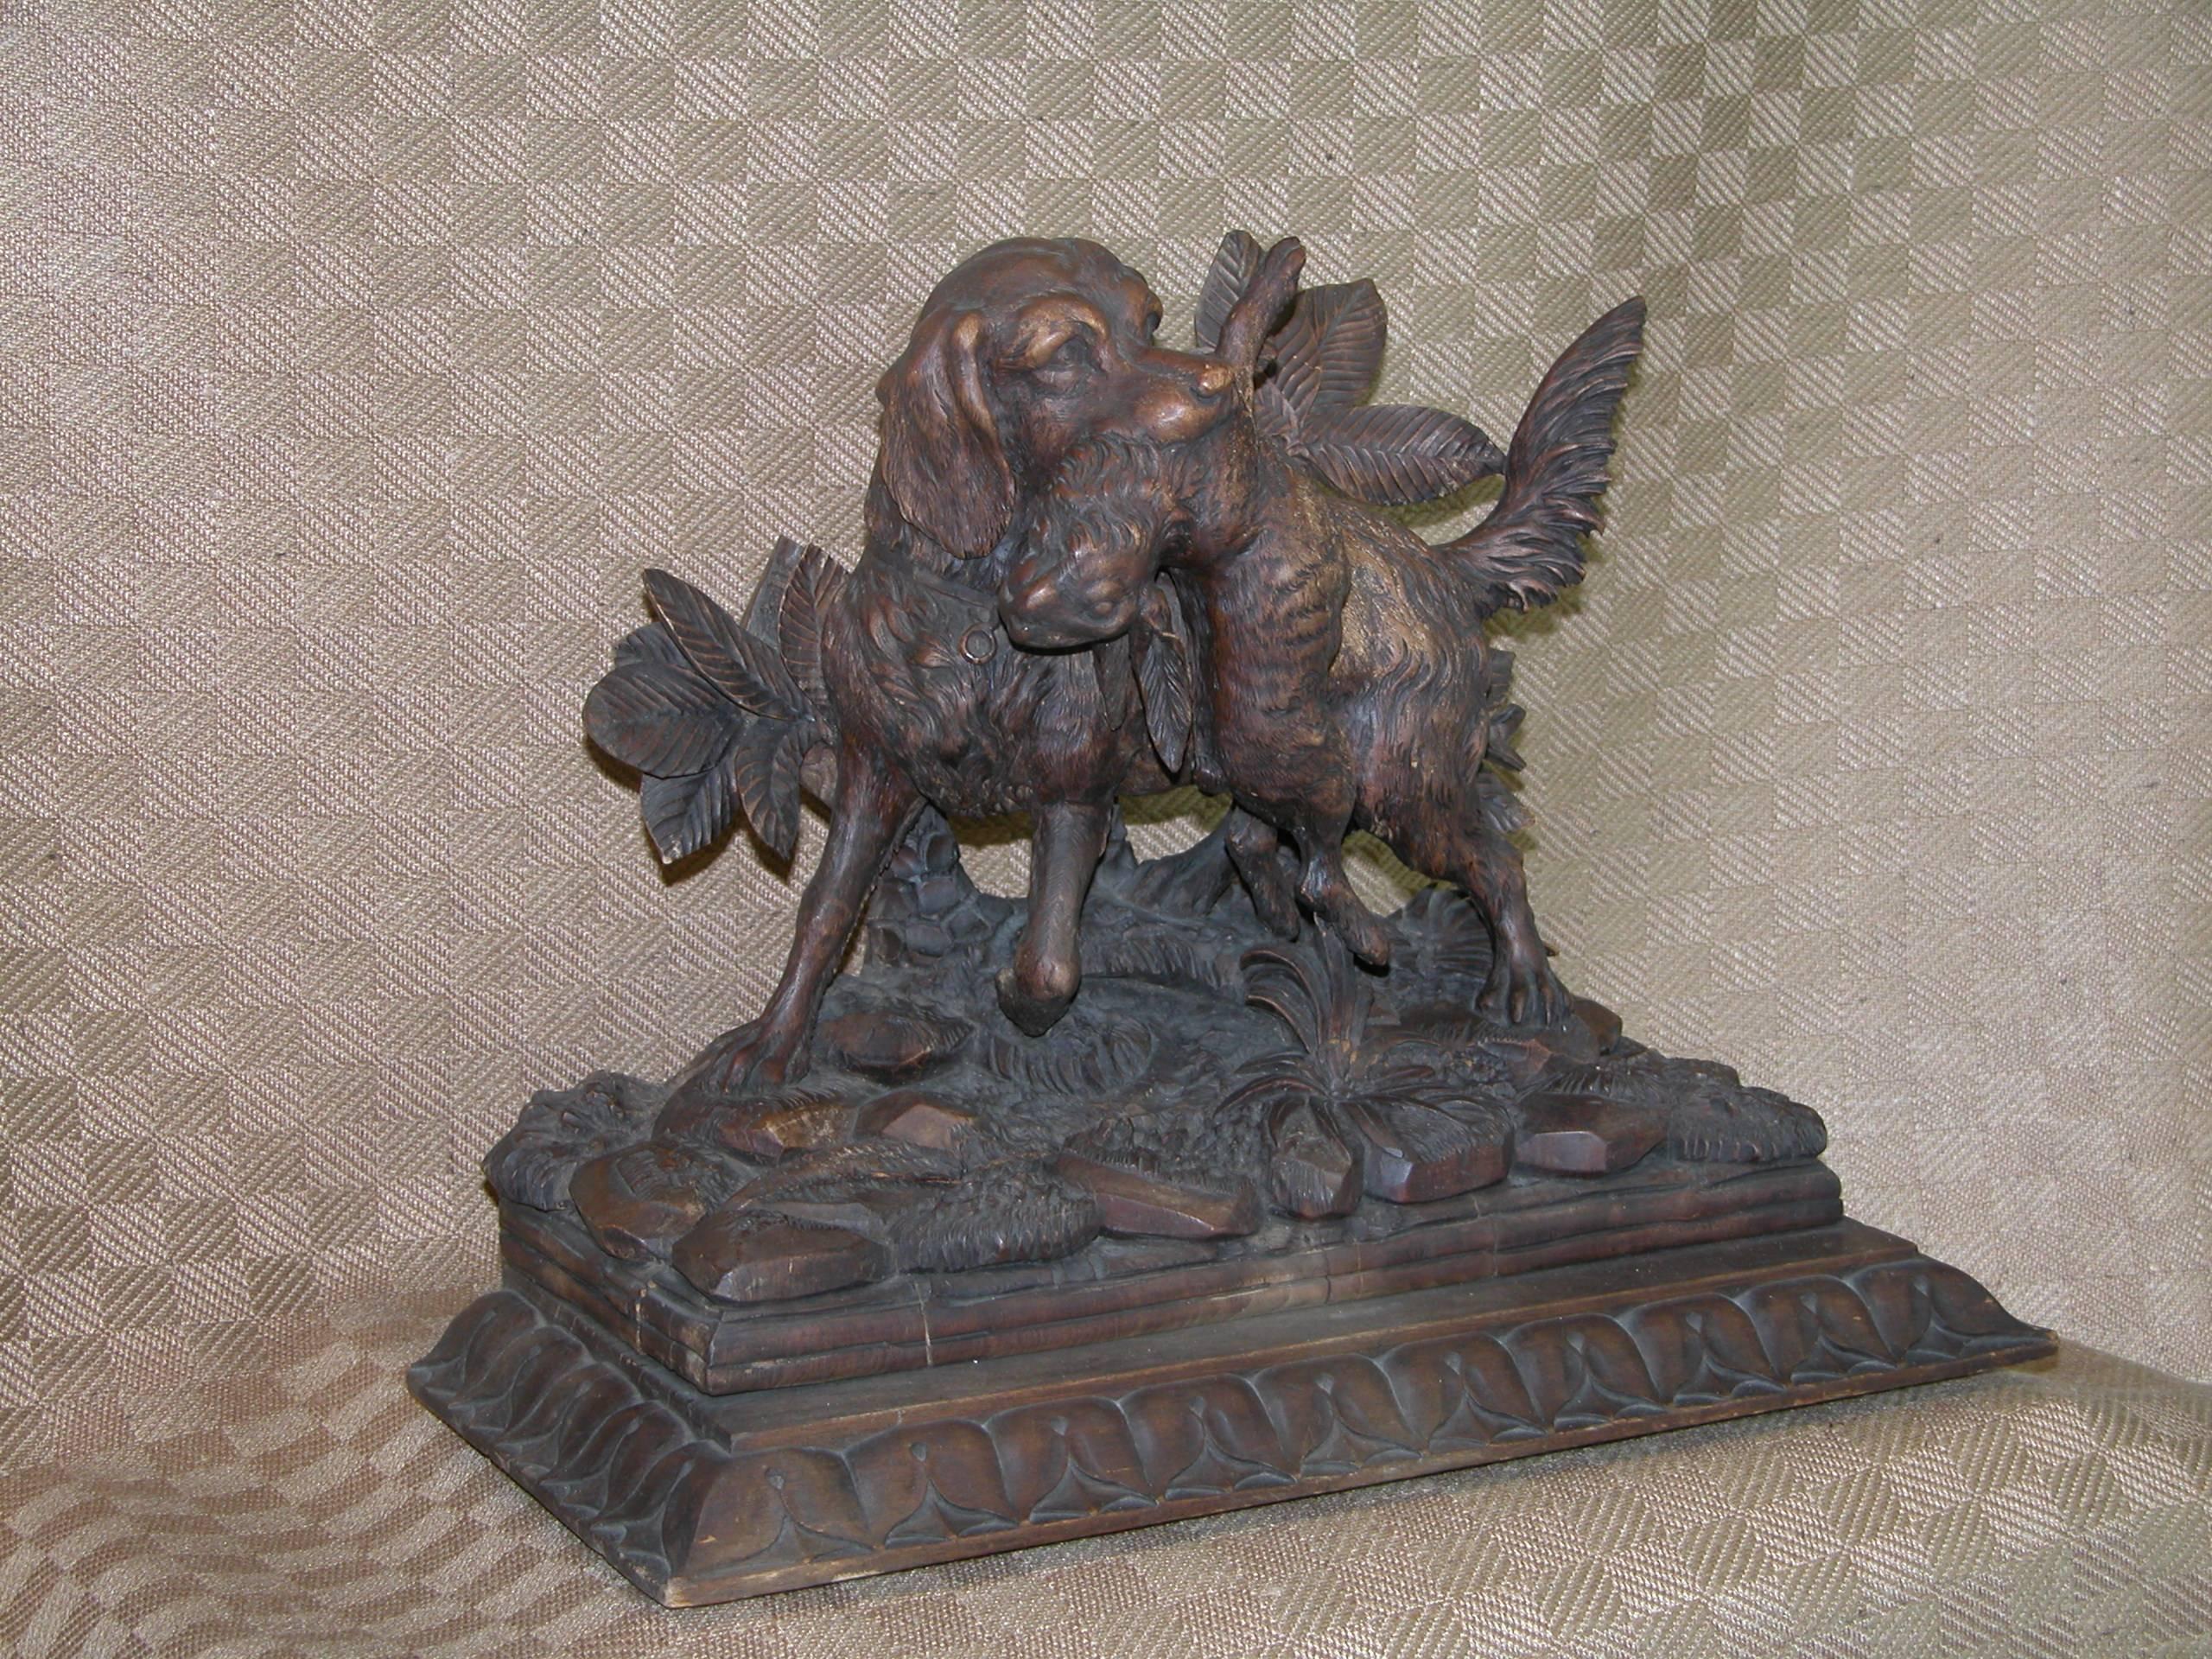 Highly detailed carving of a hunting dog after retrieving his rabbit. Mounted onto a lambs tongue base. Extremely well done and in excellent condition. Dimensions: Base; 8 x 17 x 1 1/4 inches tall; Carving: 6 x 14 x 11 5/8 inches tall, total height